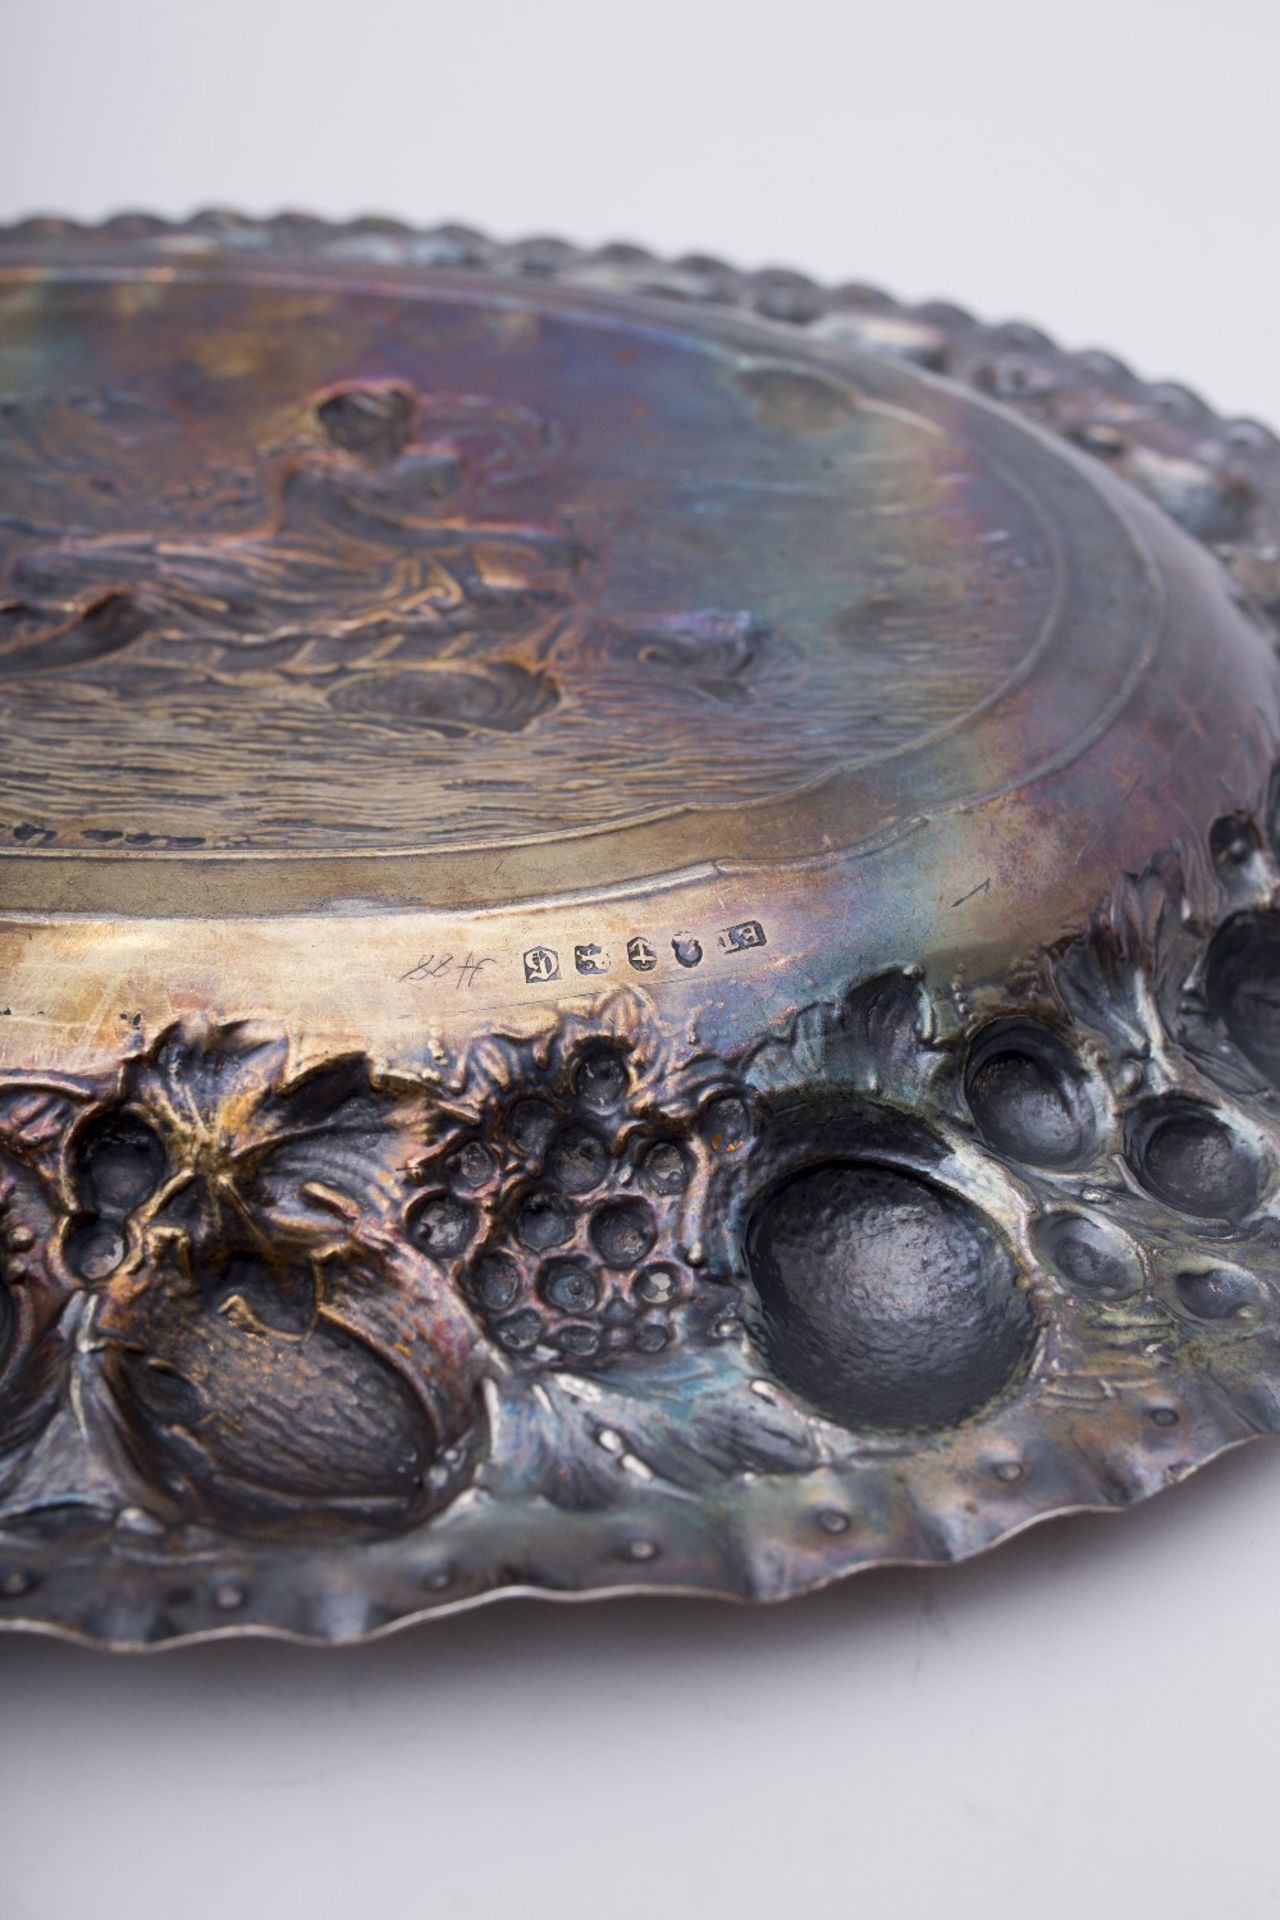 Display plate: Silver, oval-shaped with an embossed scene depicting a goddess riding two dolphins. - Image 2 of 2